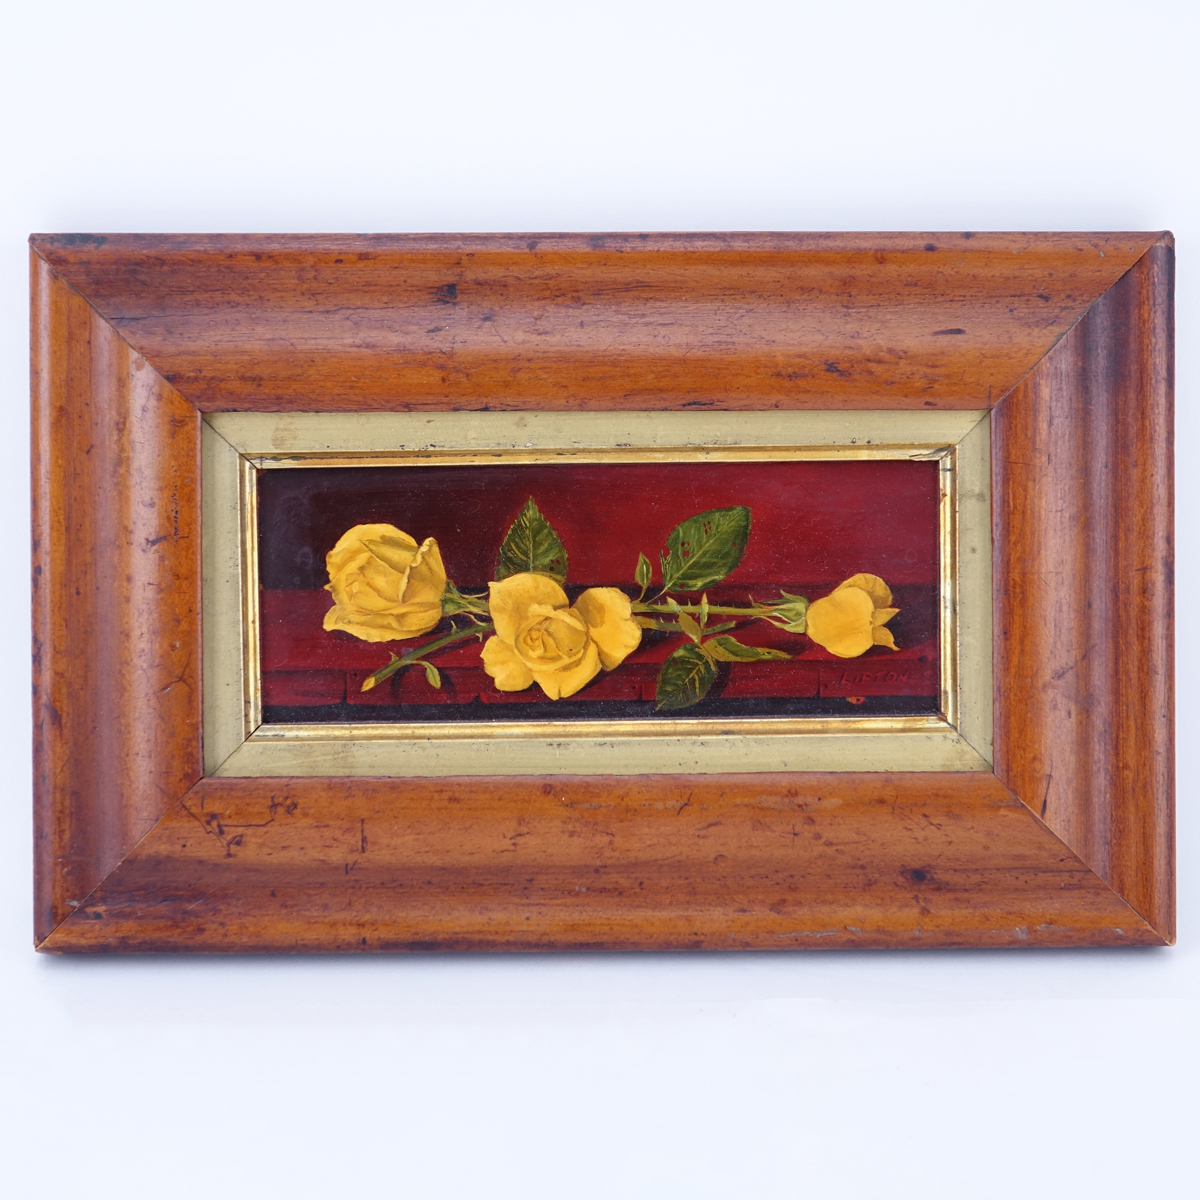 American School Oil On Board "Still Life Of Roses" Signed Lipton. Good condition.